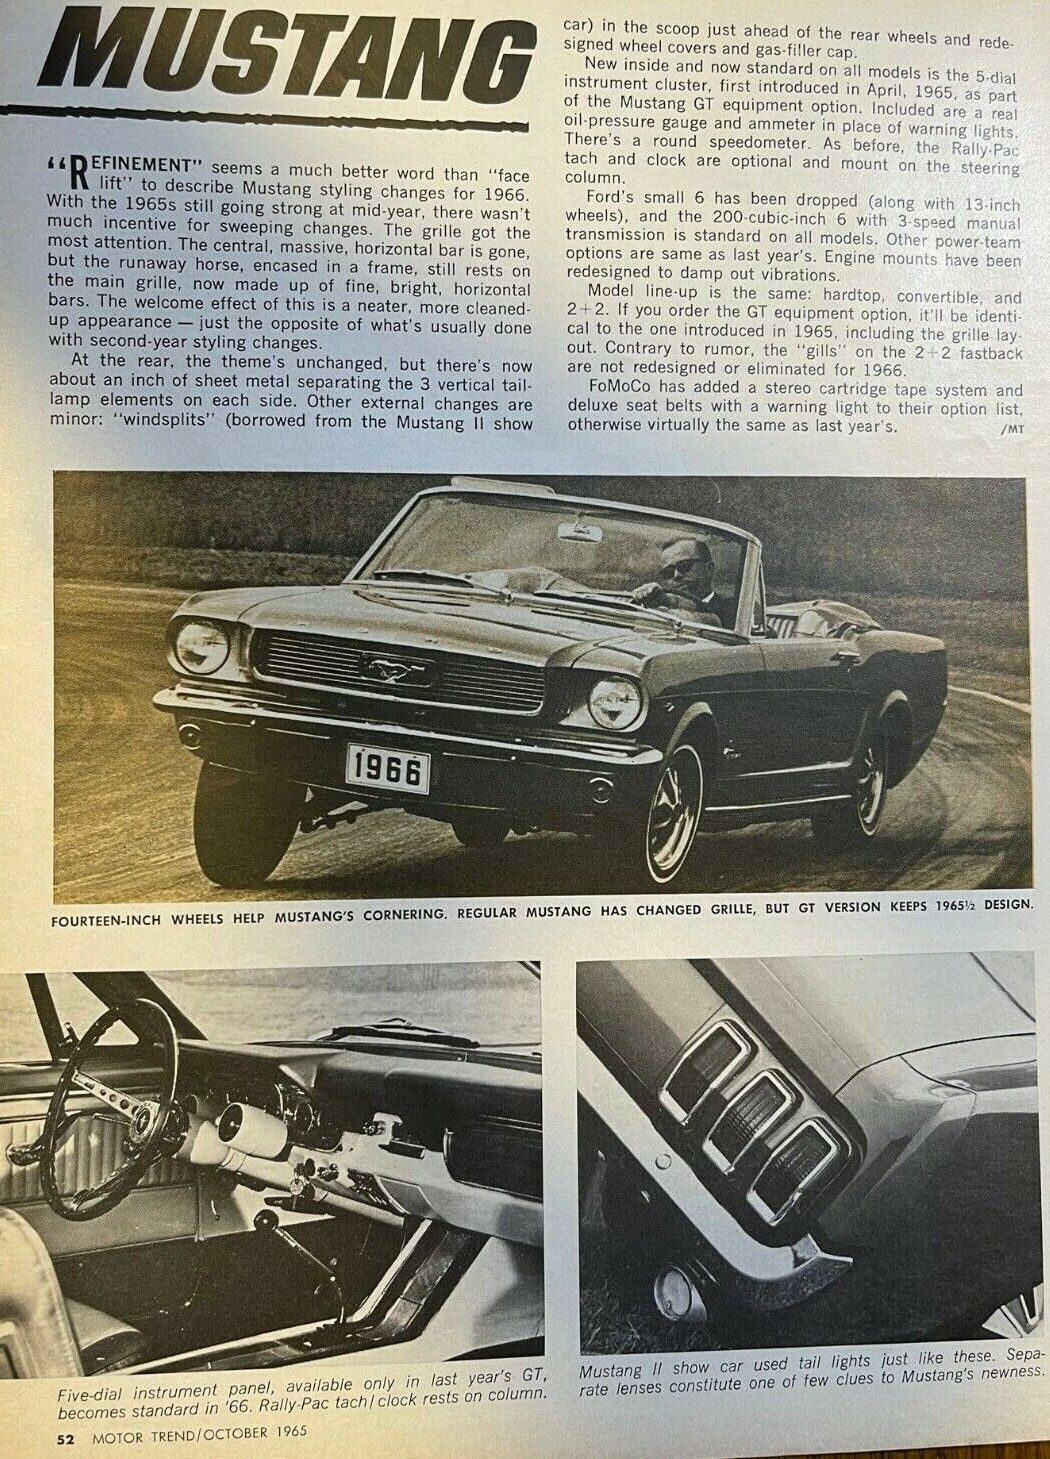 First Look 1966 Ford Mustang illustrated